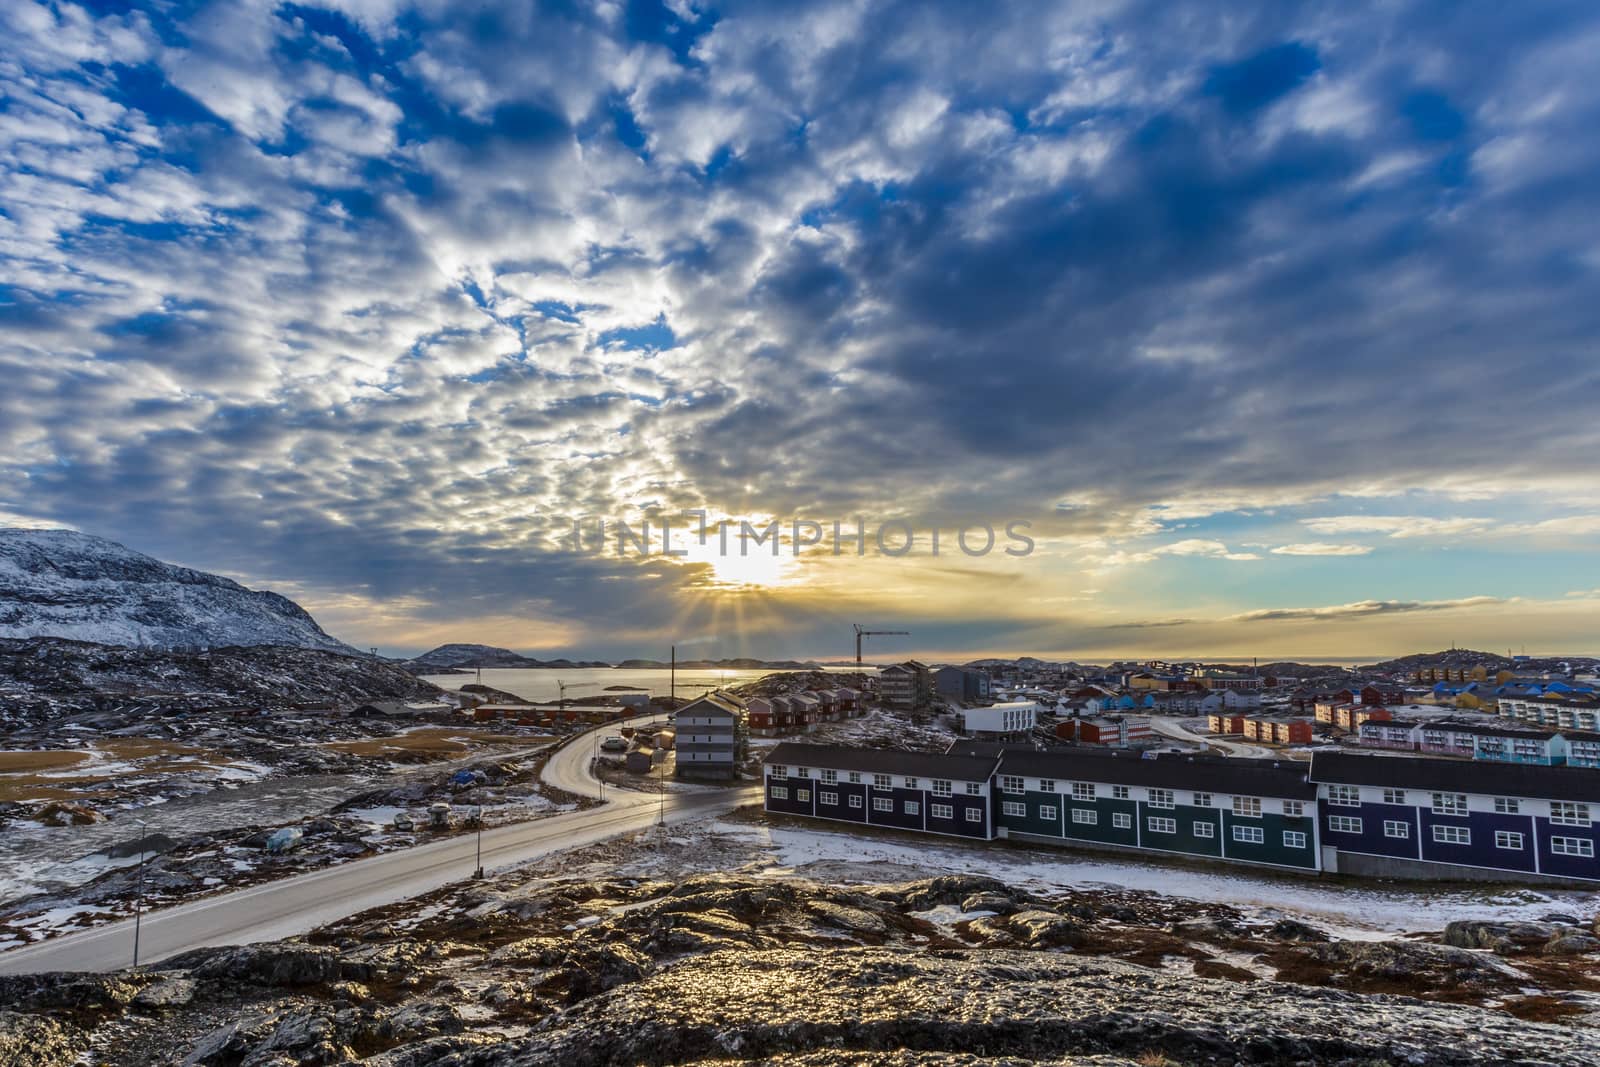 Arctic streets with houses on the rocky hills in sunset city panorama. Nuuk, Greenland